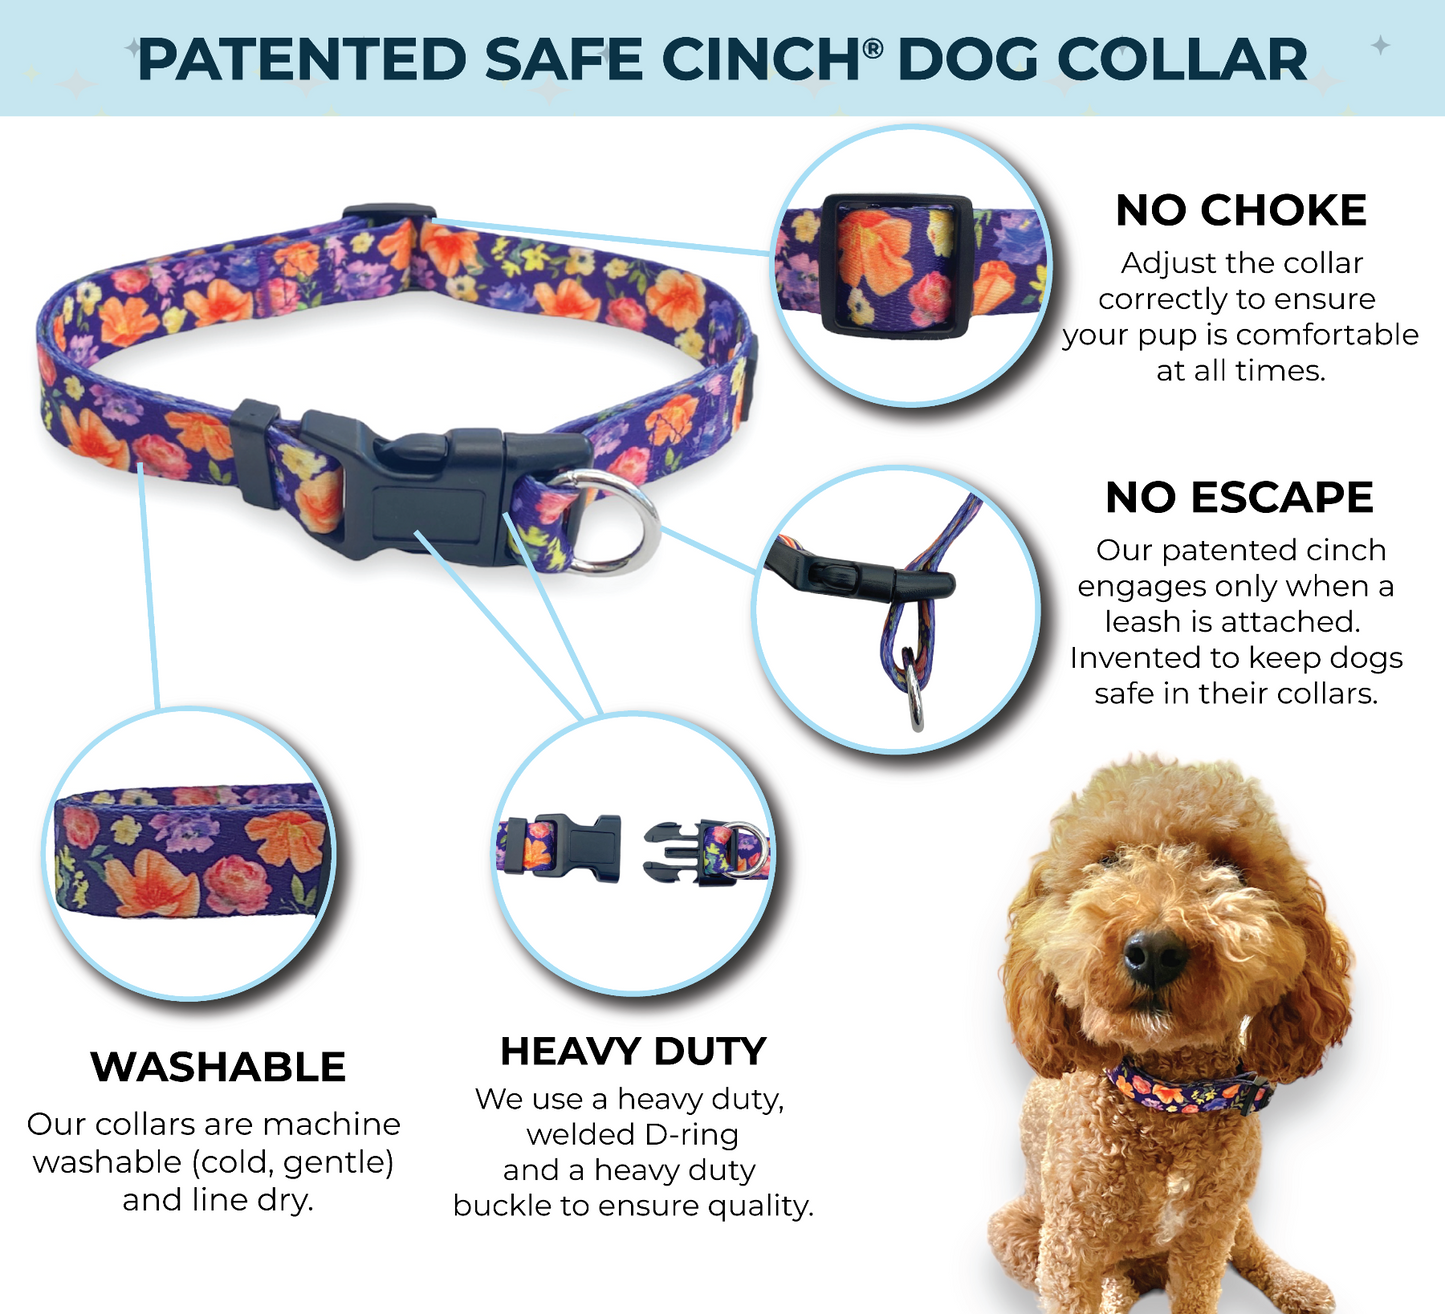 an infographic for a purple floral dog collar by fearless pet it's called a safe cinch collar